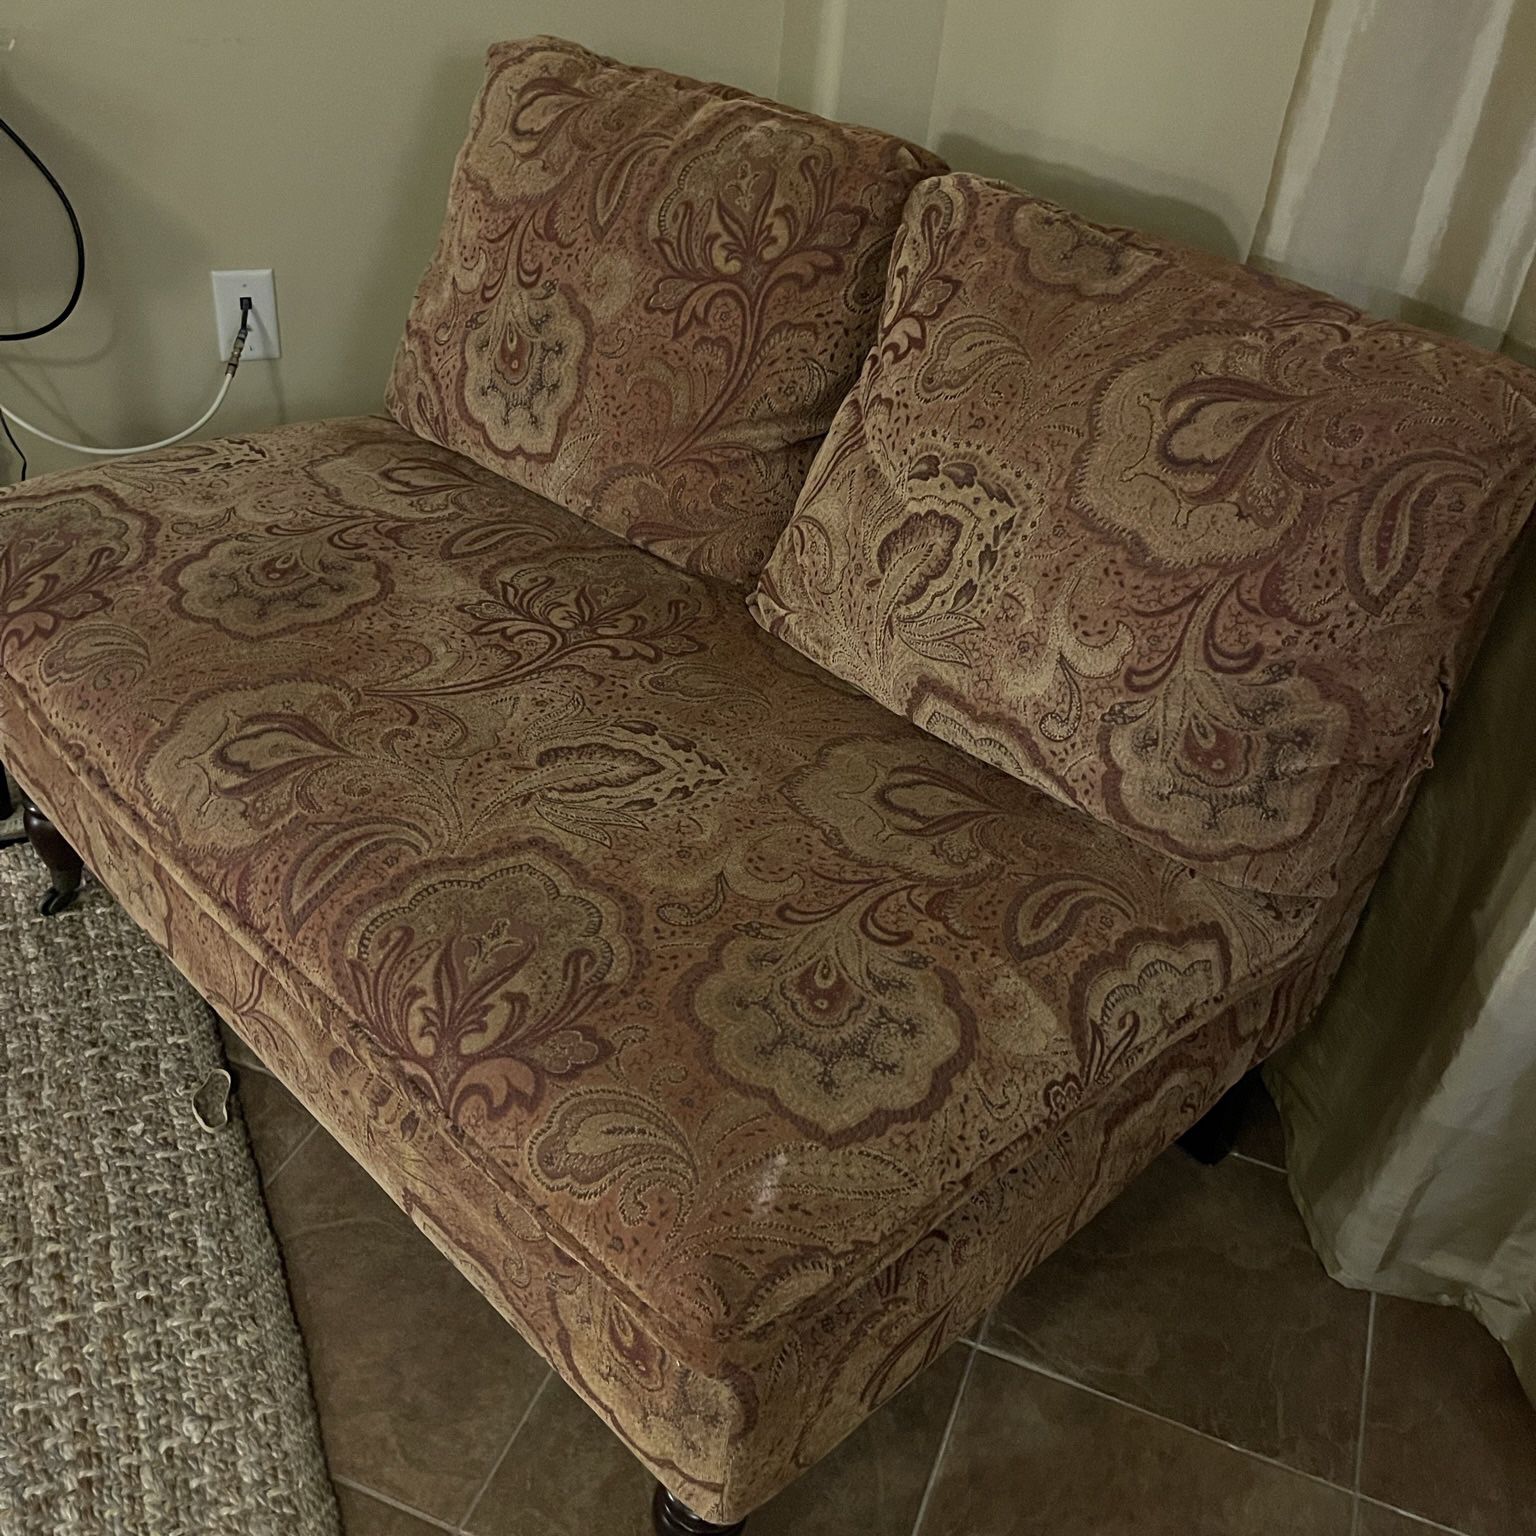  Over Sized Vintage Accent Chair - $25